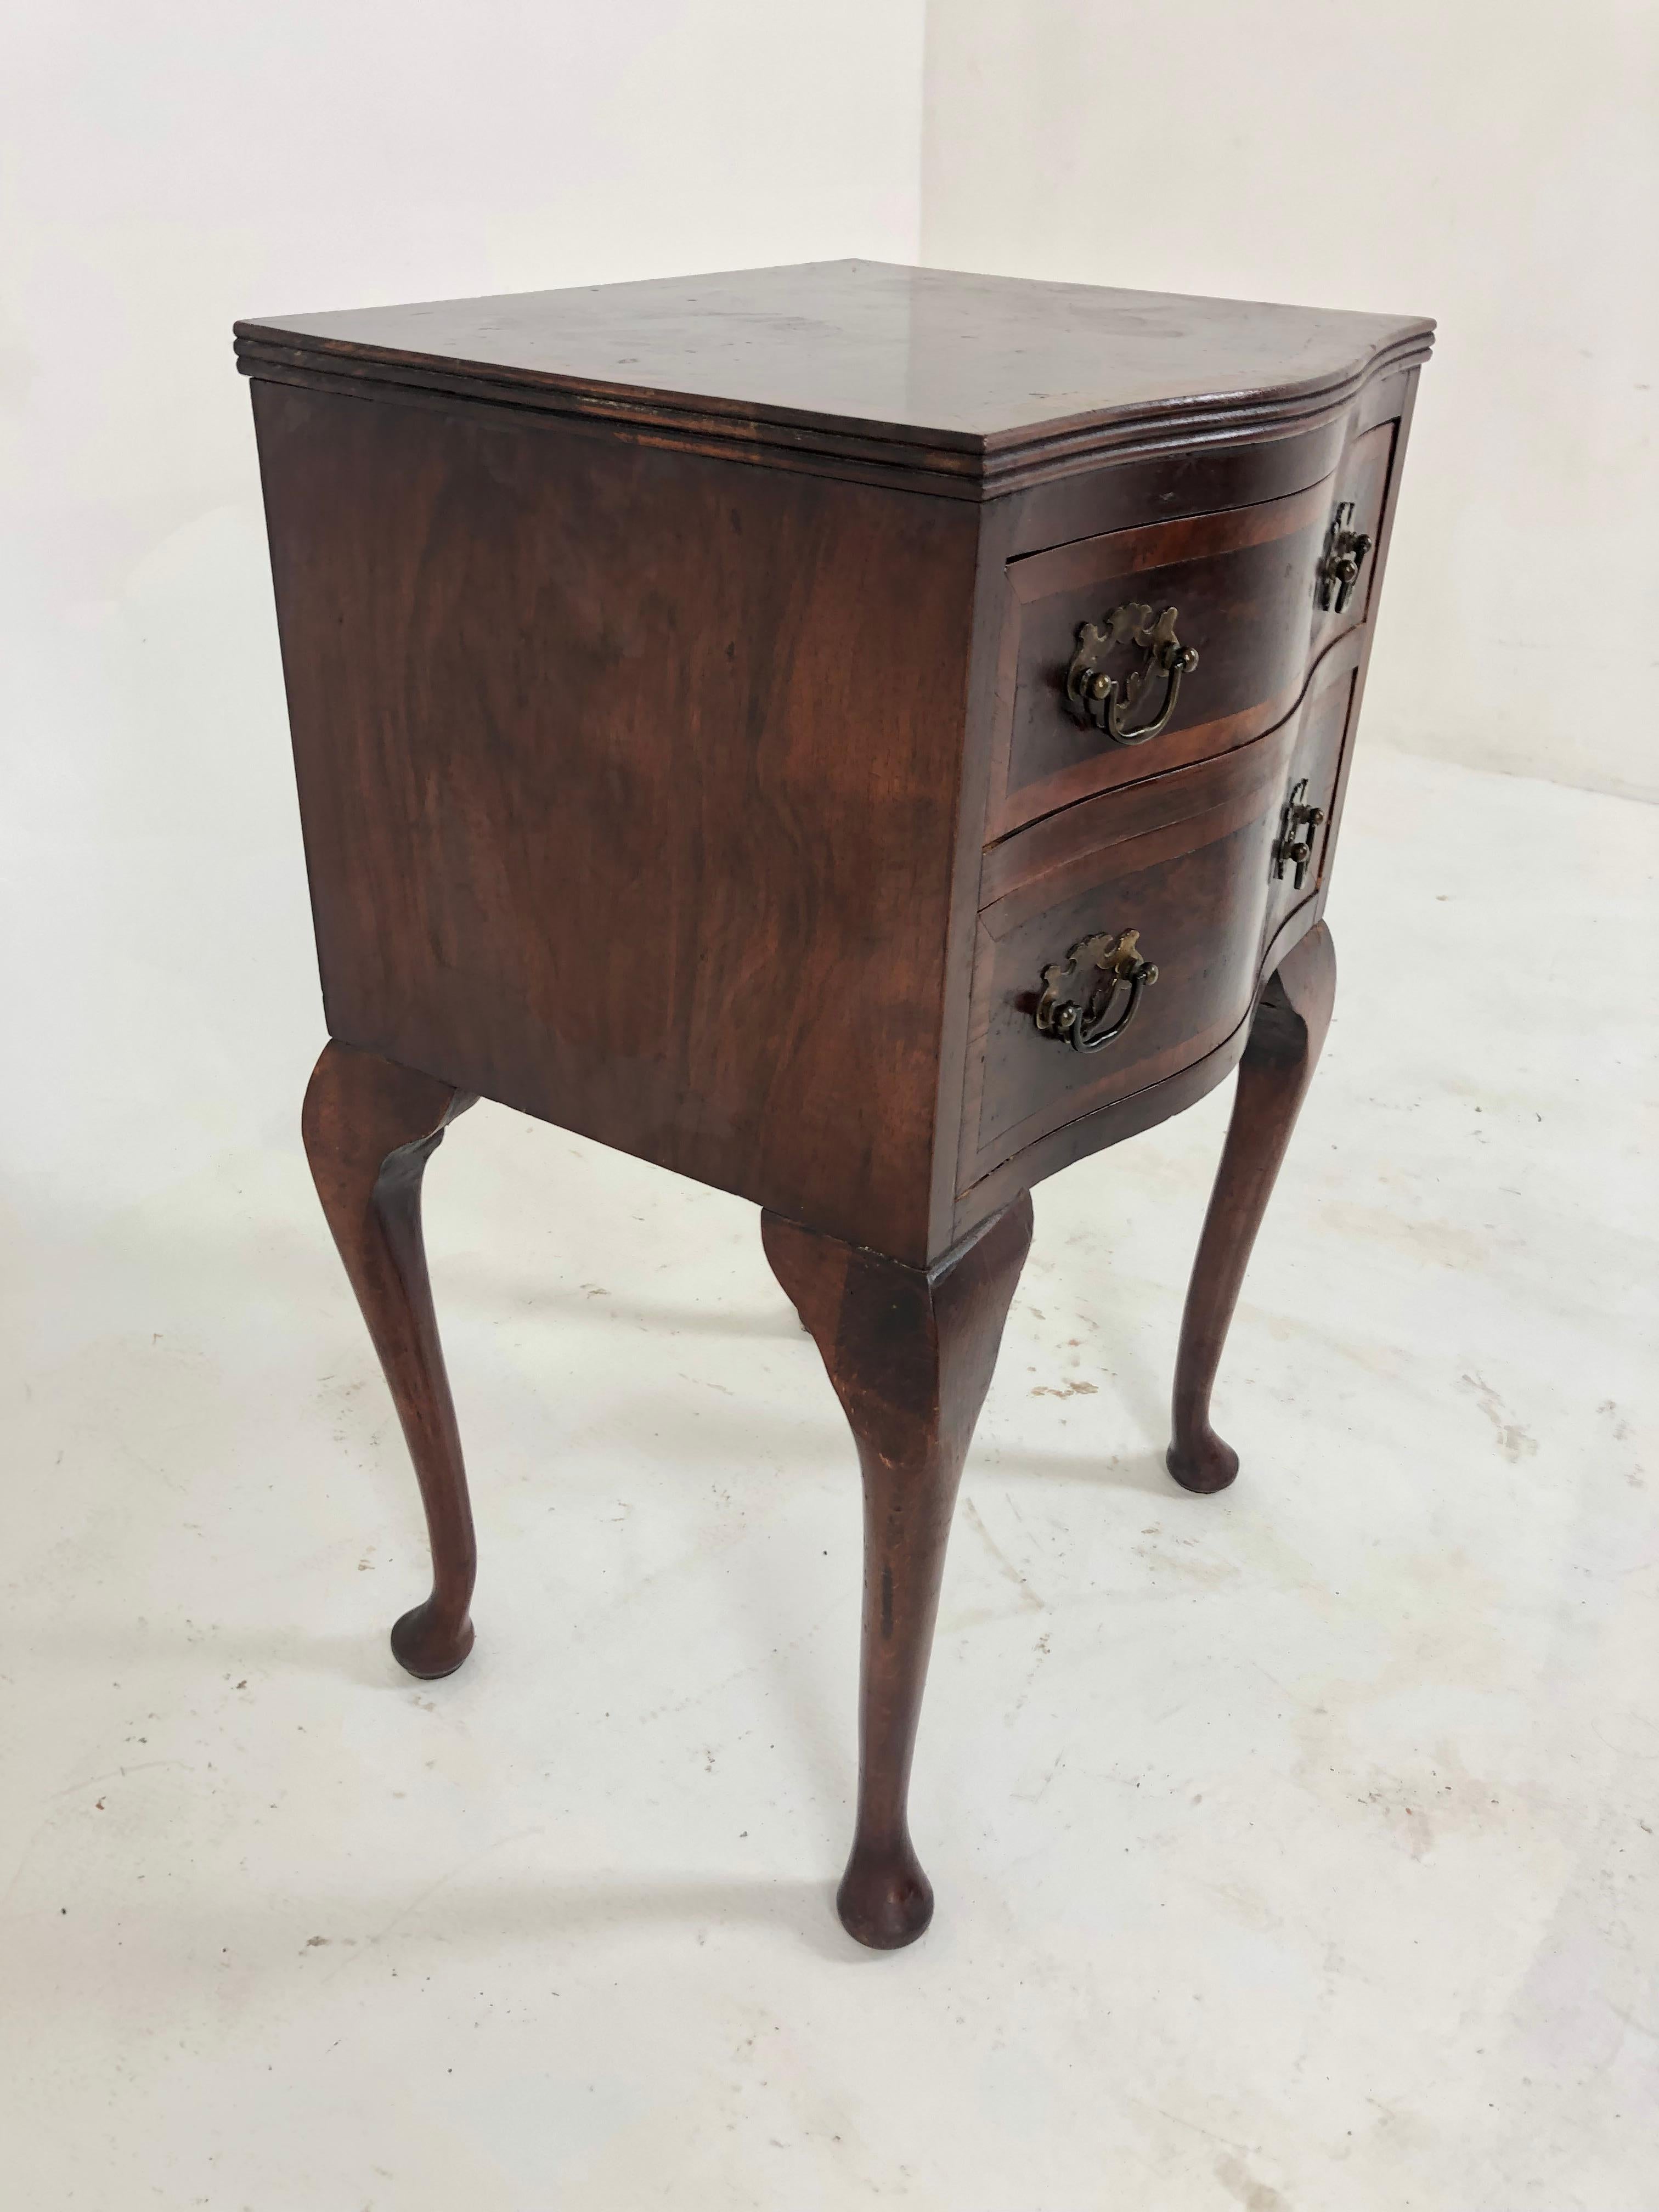 Vintage Burr walnut inlaid nightstand bedside, lamp table, Scotland 1930, H849

Scotland 1930
Solid Walnut and Veneers
Original finish
Inlaid bow front moulded top
Two inlaid graduating dovetailed drawers below
All standing on cabriole